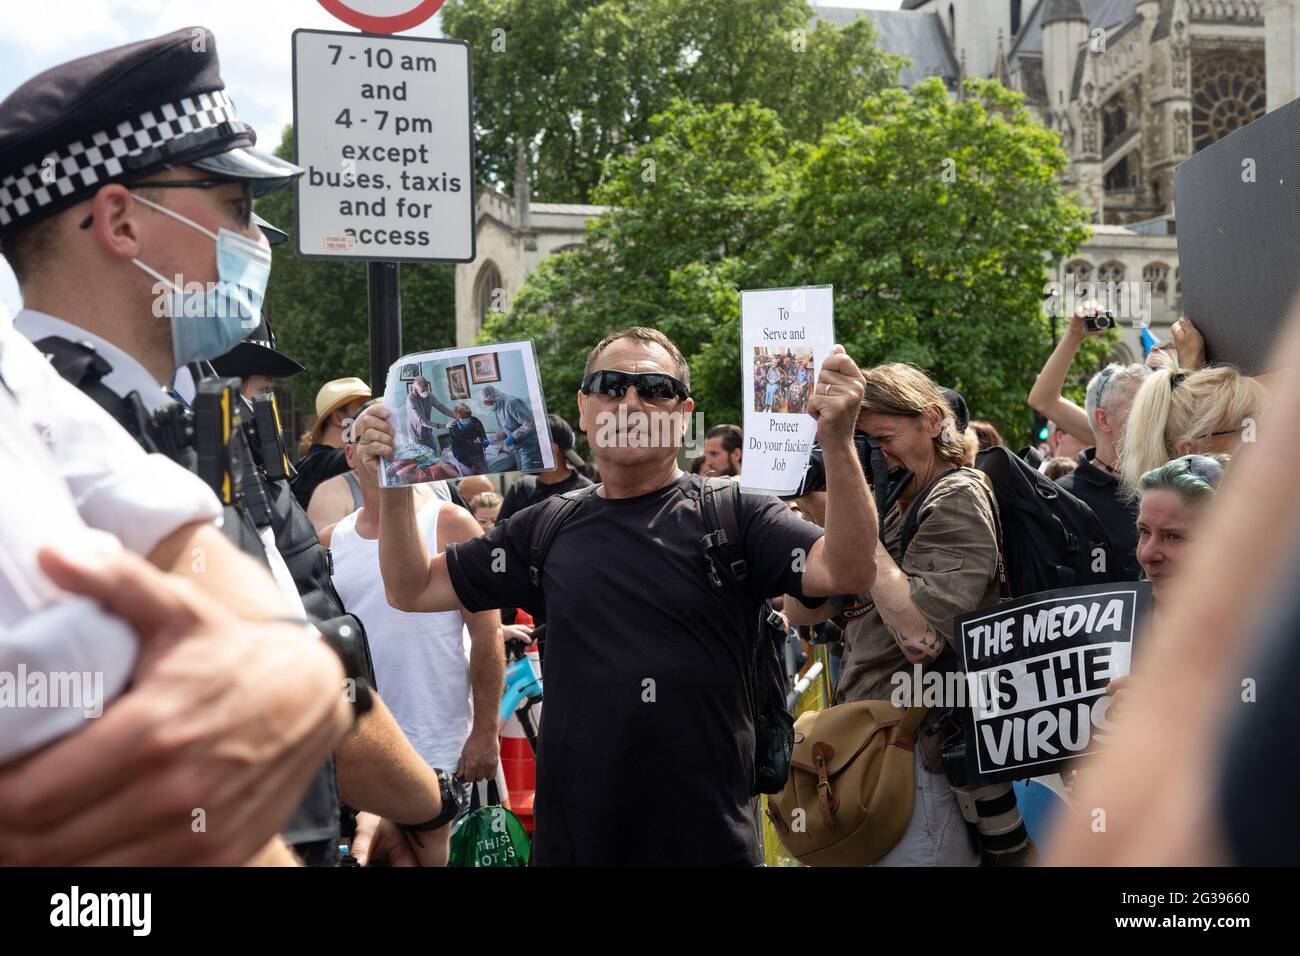 London, UK. 14th June 2021. Anti-vaxx protester confronts police officer outside Parliament. Yuen Ching Ng/Alamy Live News Stock Photo